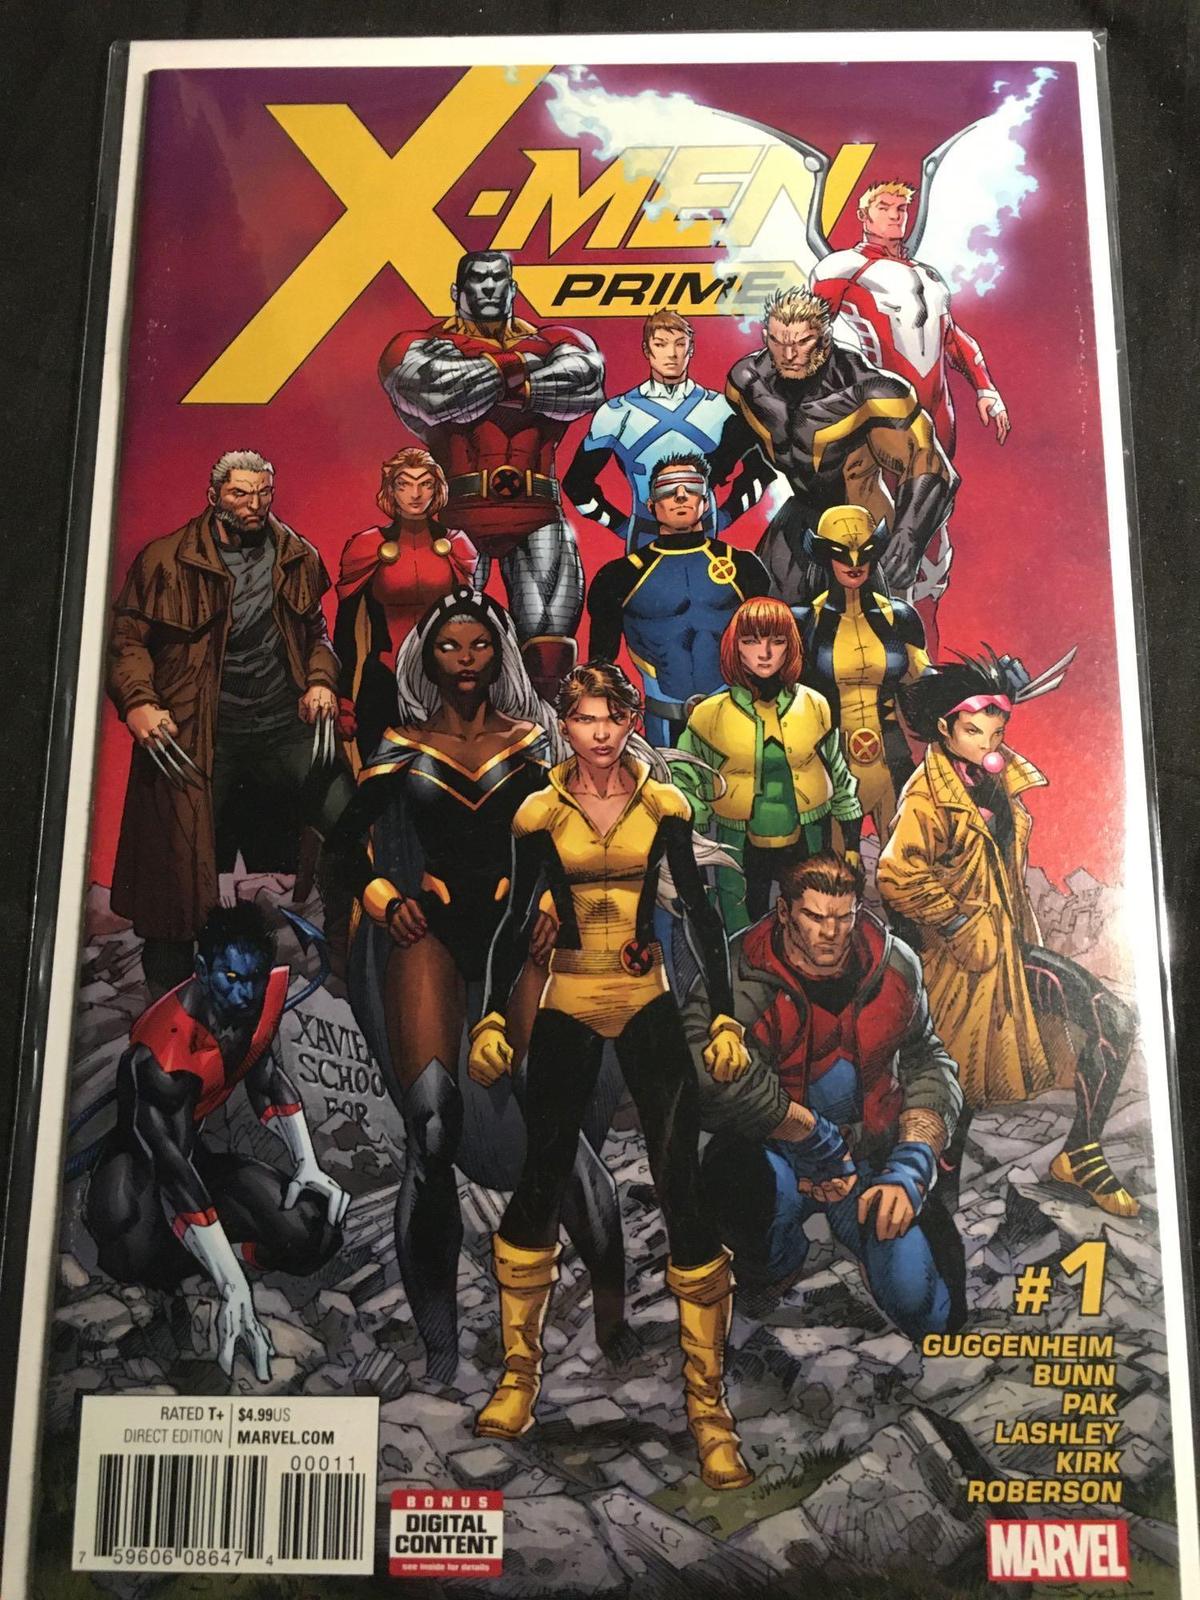 X-Men Prime #1 Comic Book from Amazing Collection